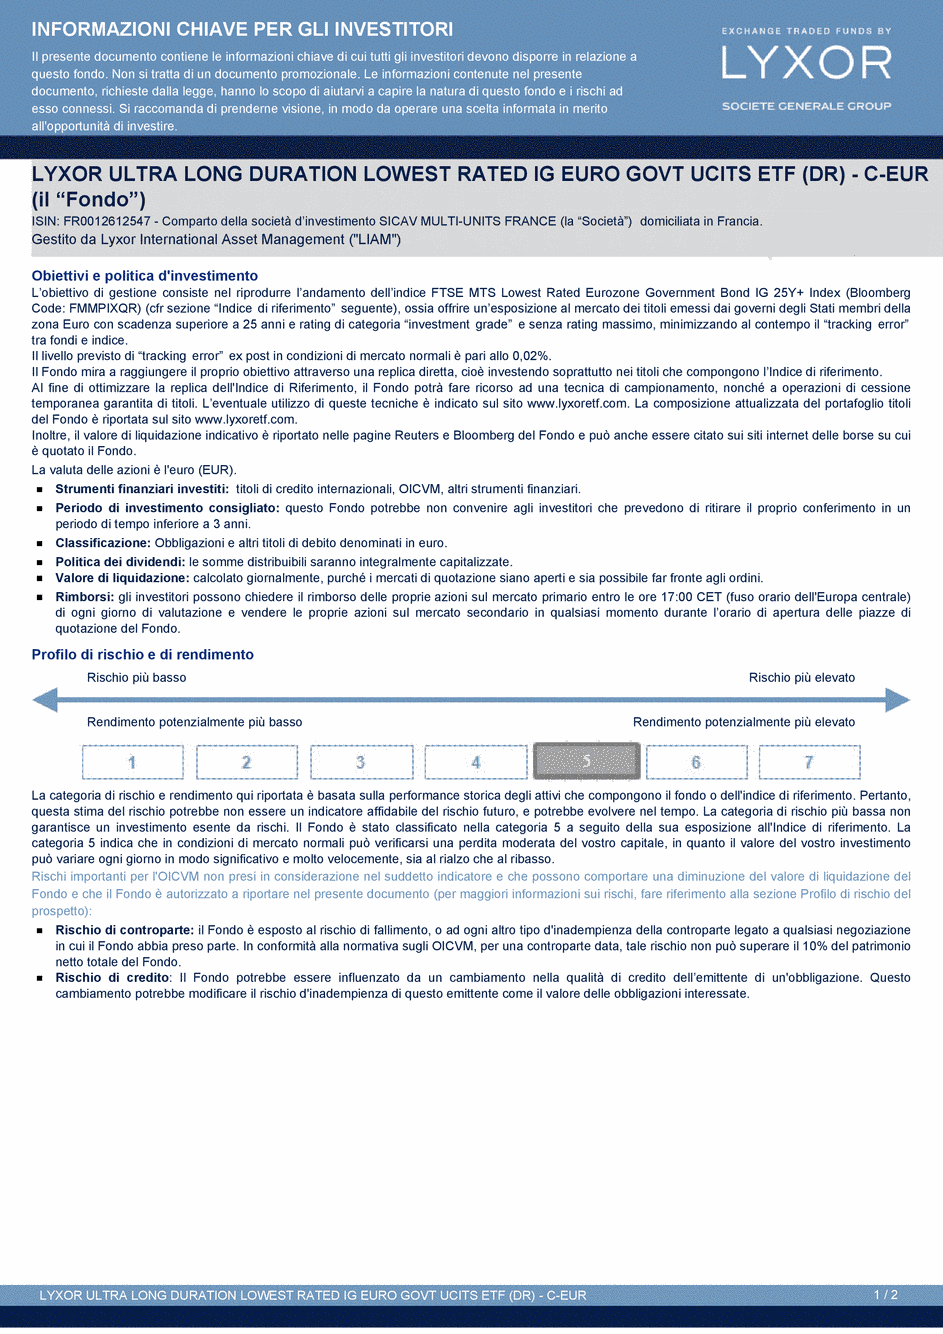 DICI LYXOR ULTRA LONG DURATION LOWEST RATED IG EURO GOVT UCITS ETF (DR) Part C-EUR - 26/03/2015 - Italien